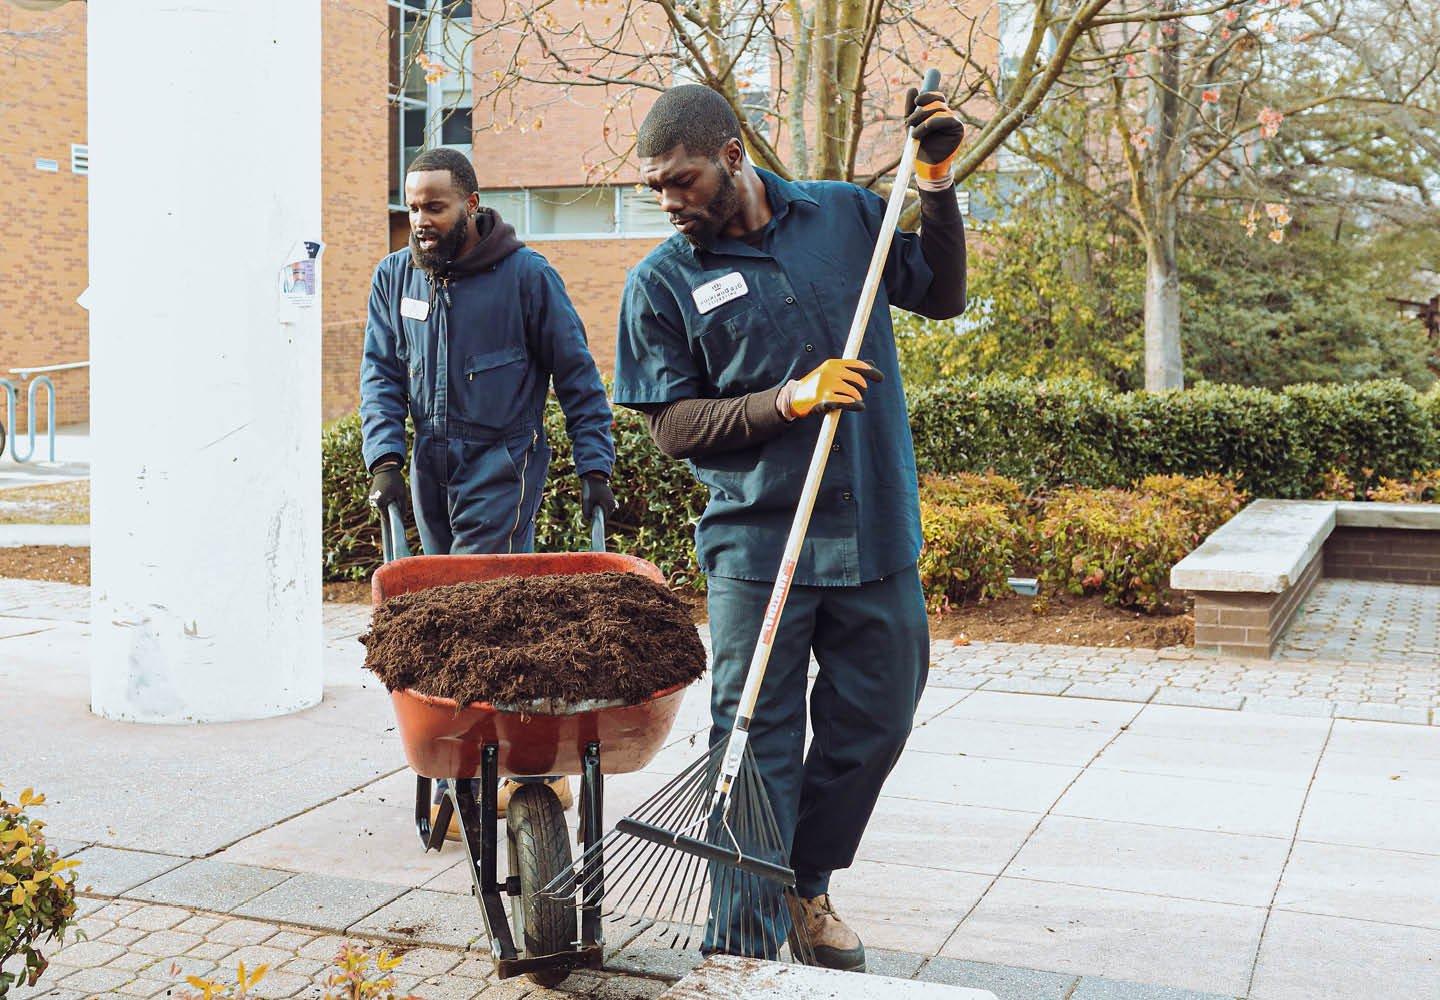 Two grounds workers tending landscape.